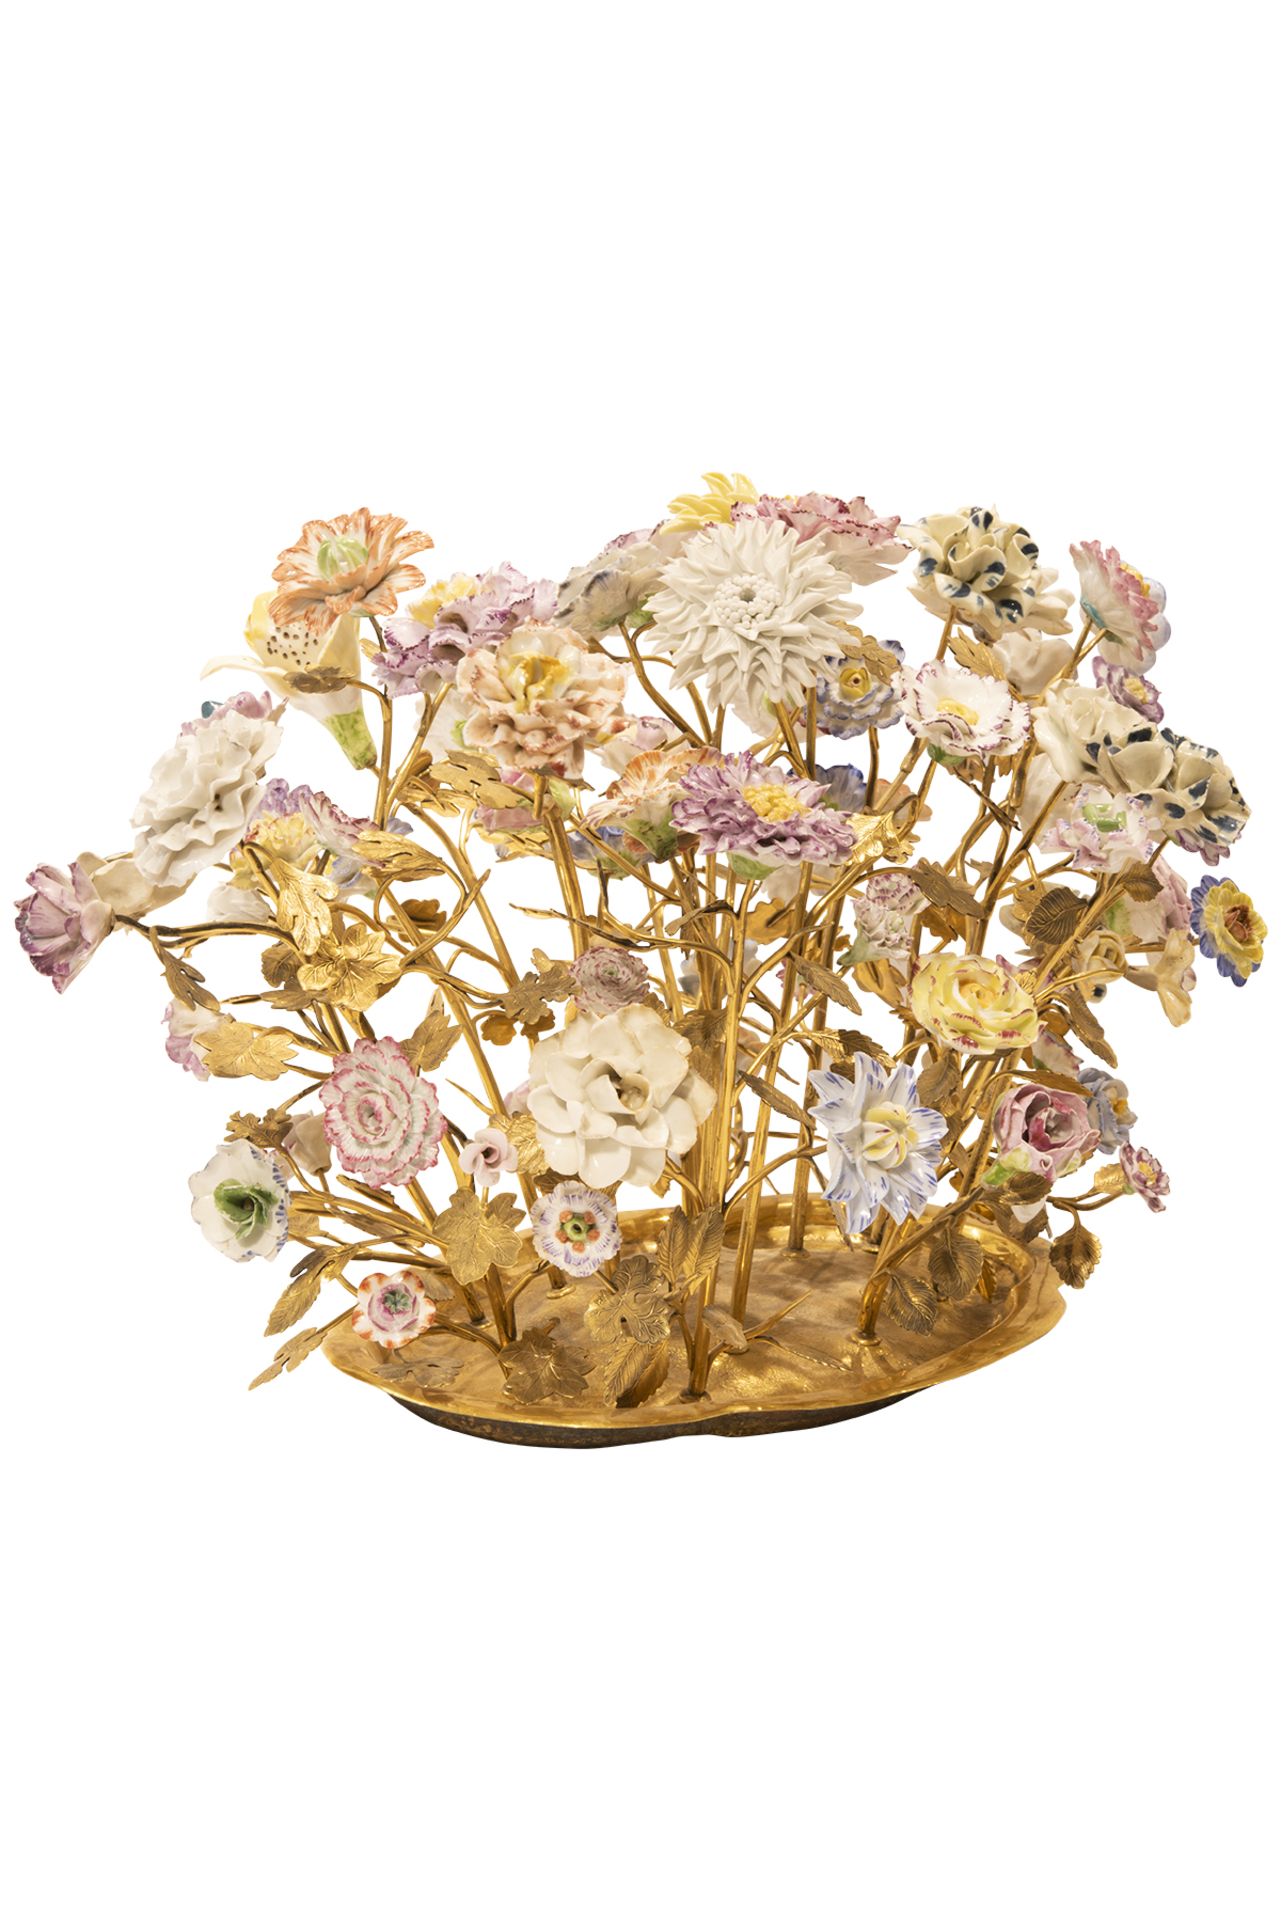 Table decoration bouquet of flowers, France and Meissen around 1900 - Image 2 of 7